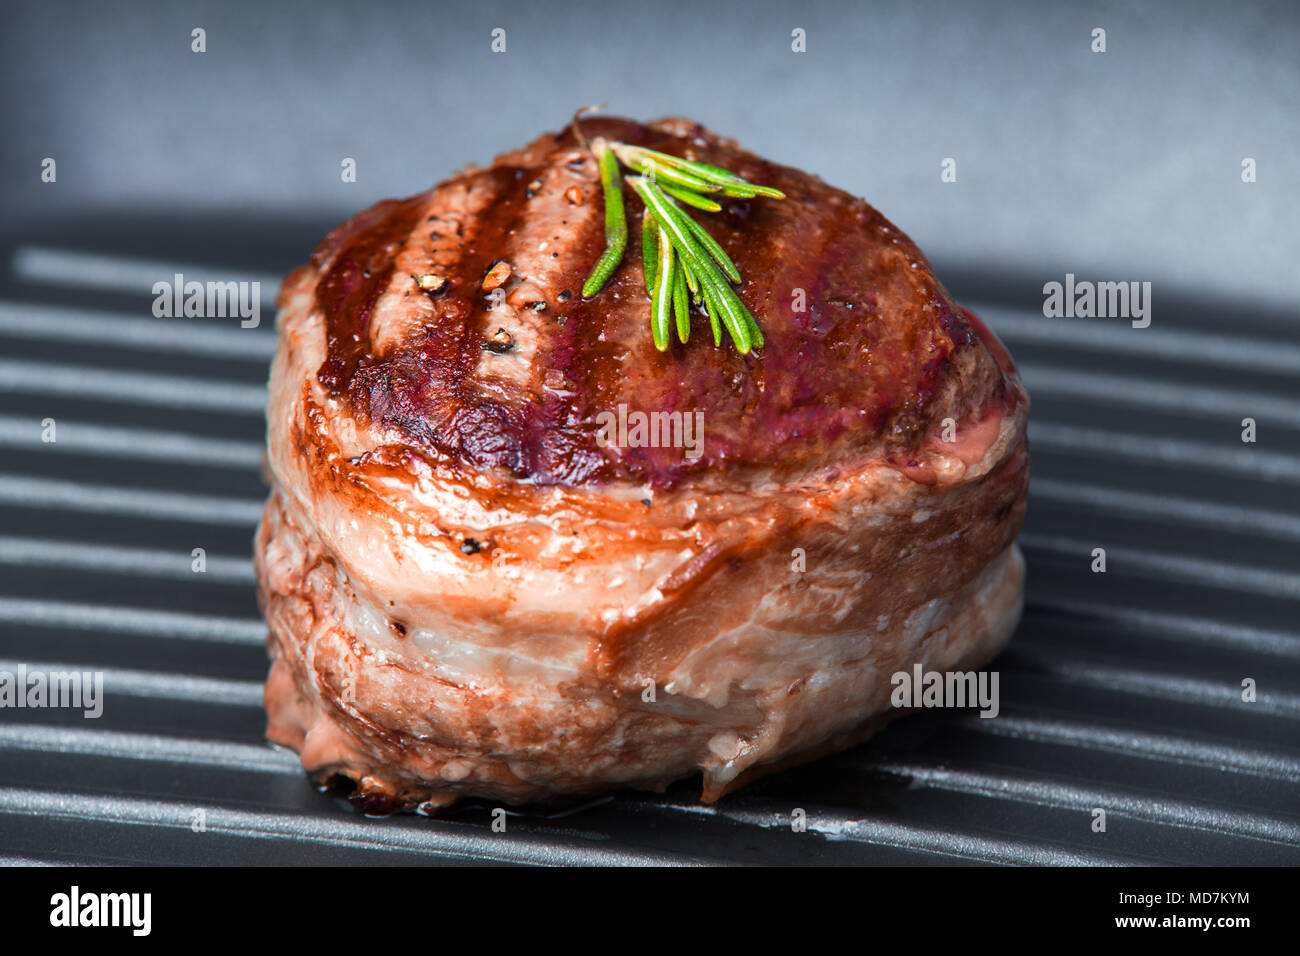 Fried beef steak on pan close-up view. Tasty fillet mignon steak. Stock Photo